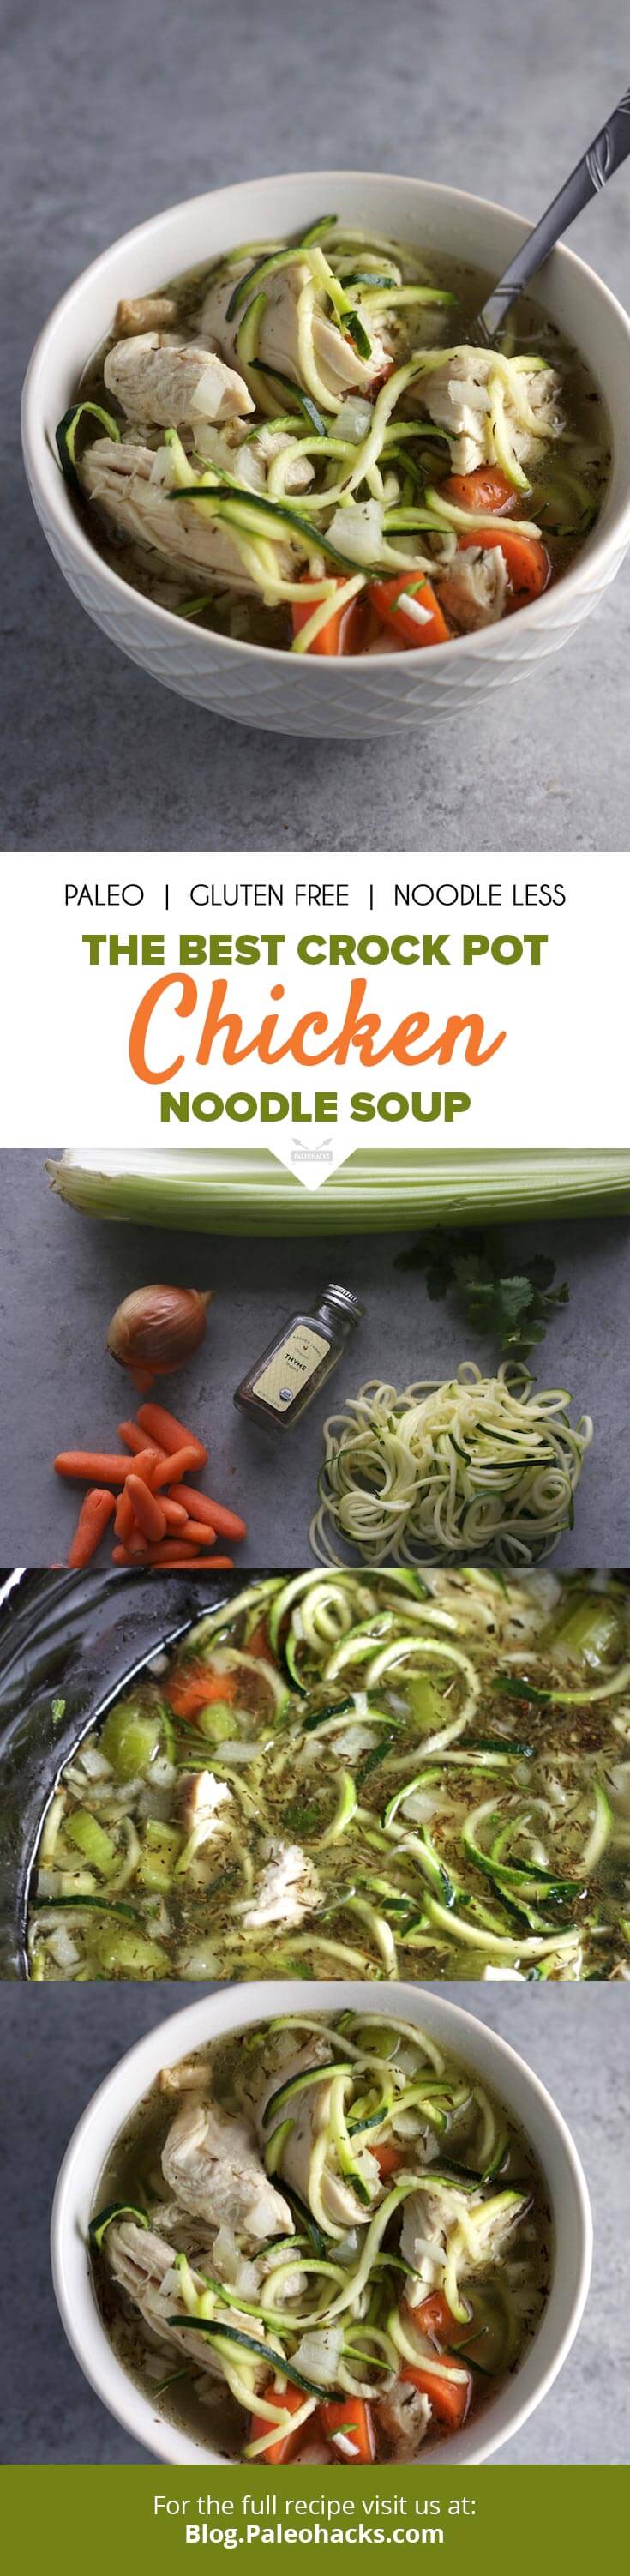 Try this tasty Crock Pot Chicken Noodle Soup recipe with zucchini noodles and fresh herbs. The best part, it's made in a slow cooker!